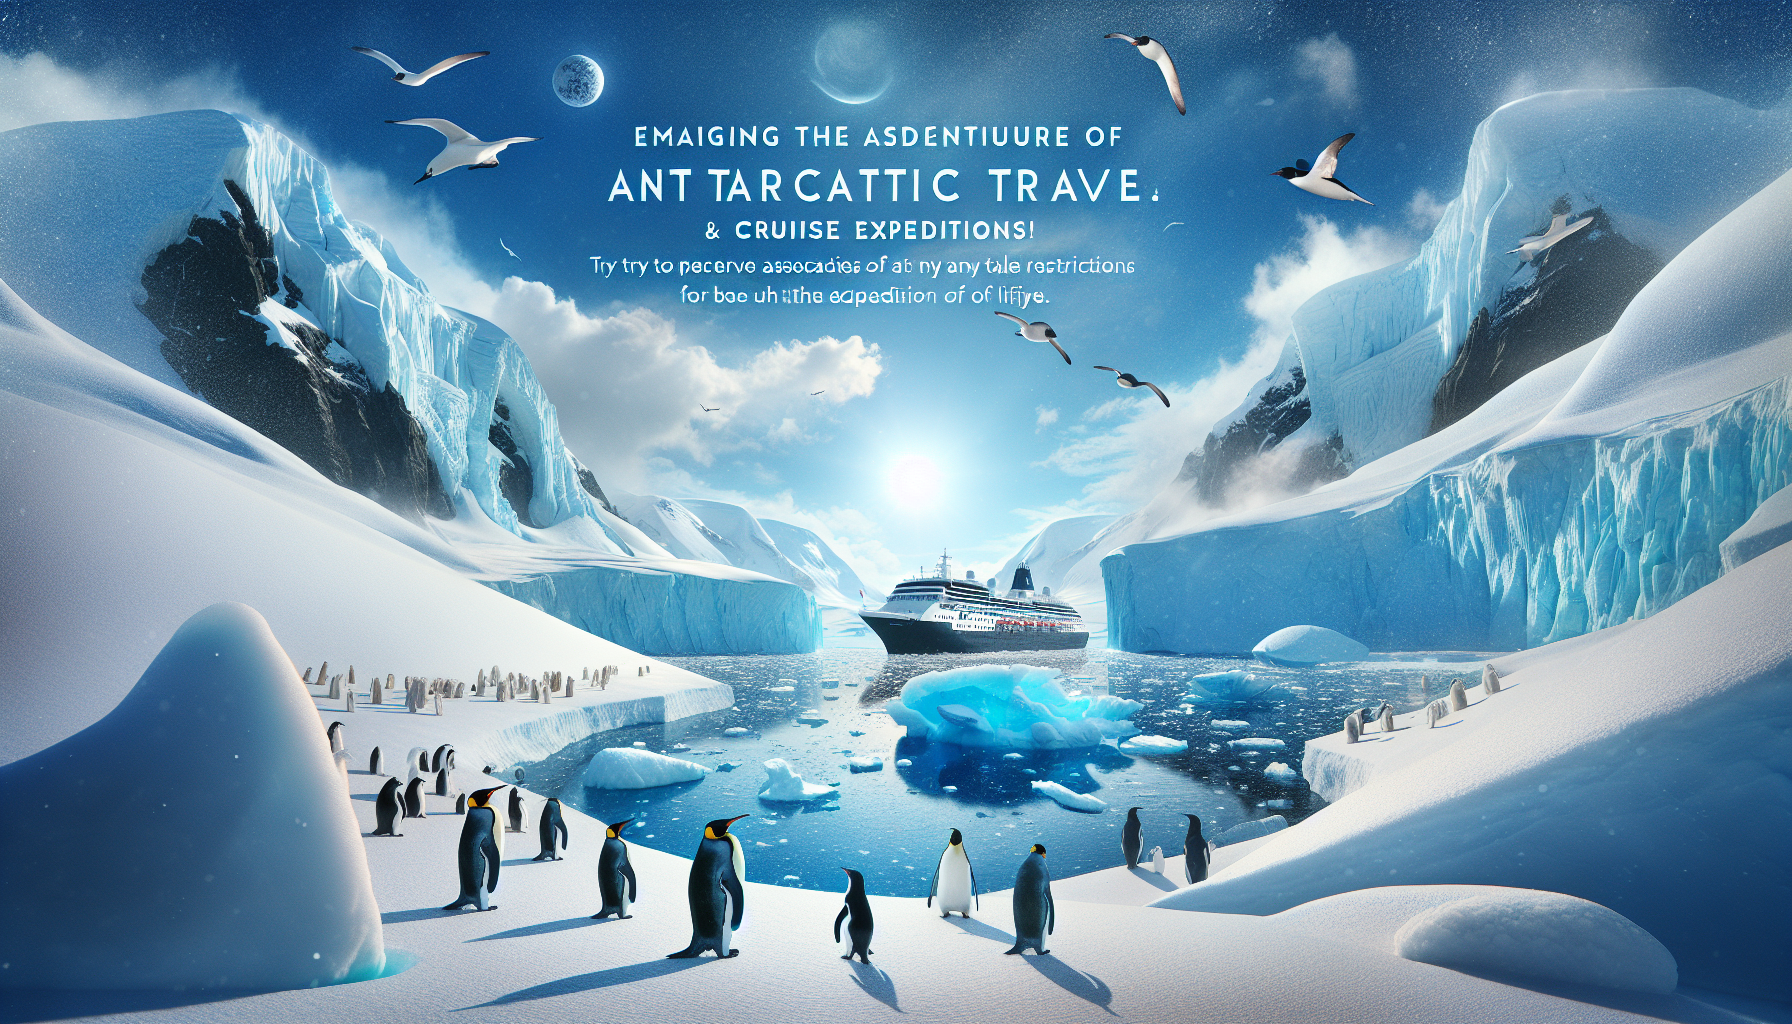 explore the wonders of antarctic travel and cruises, and learn about age restrictions for antarctic cruises. plan your dream adventure today!